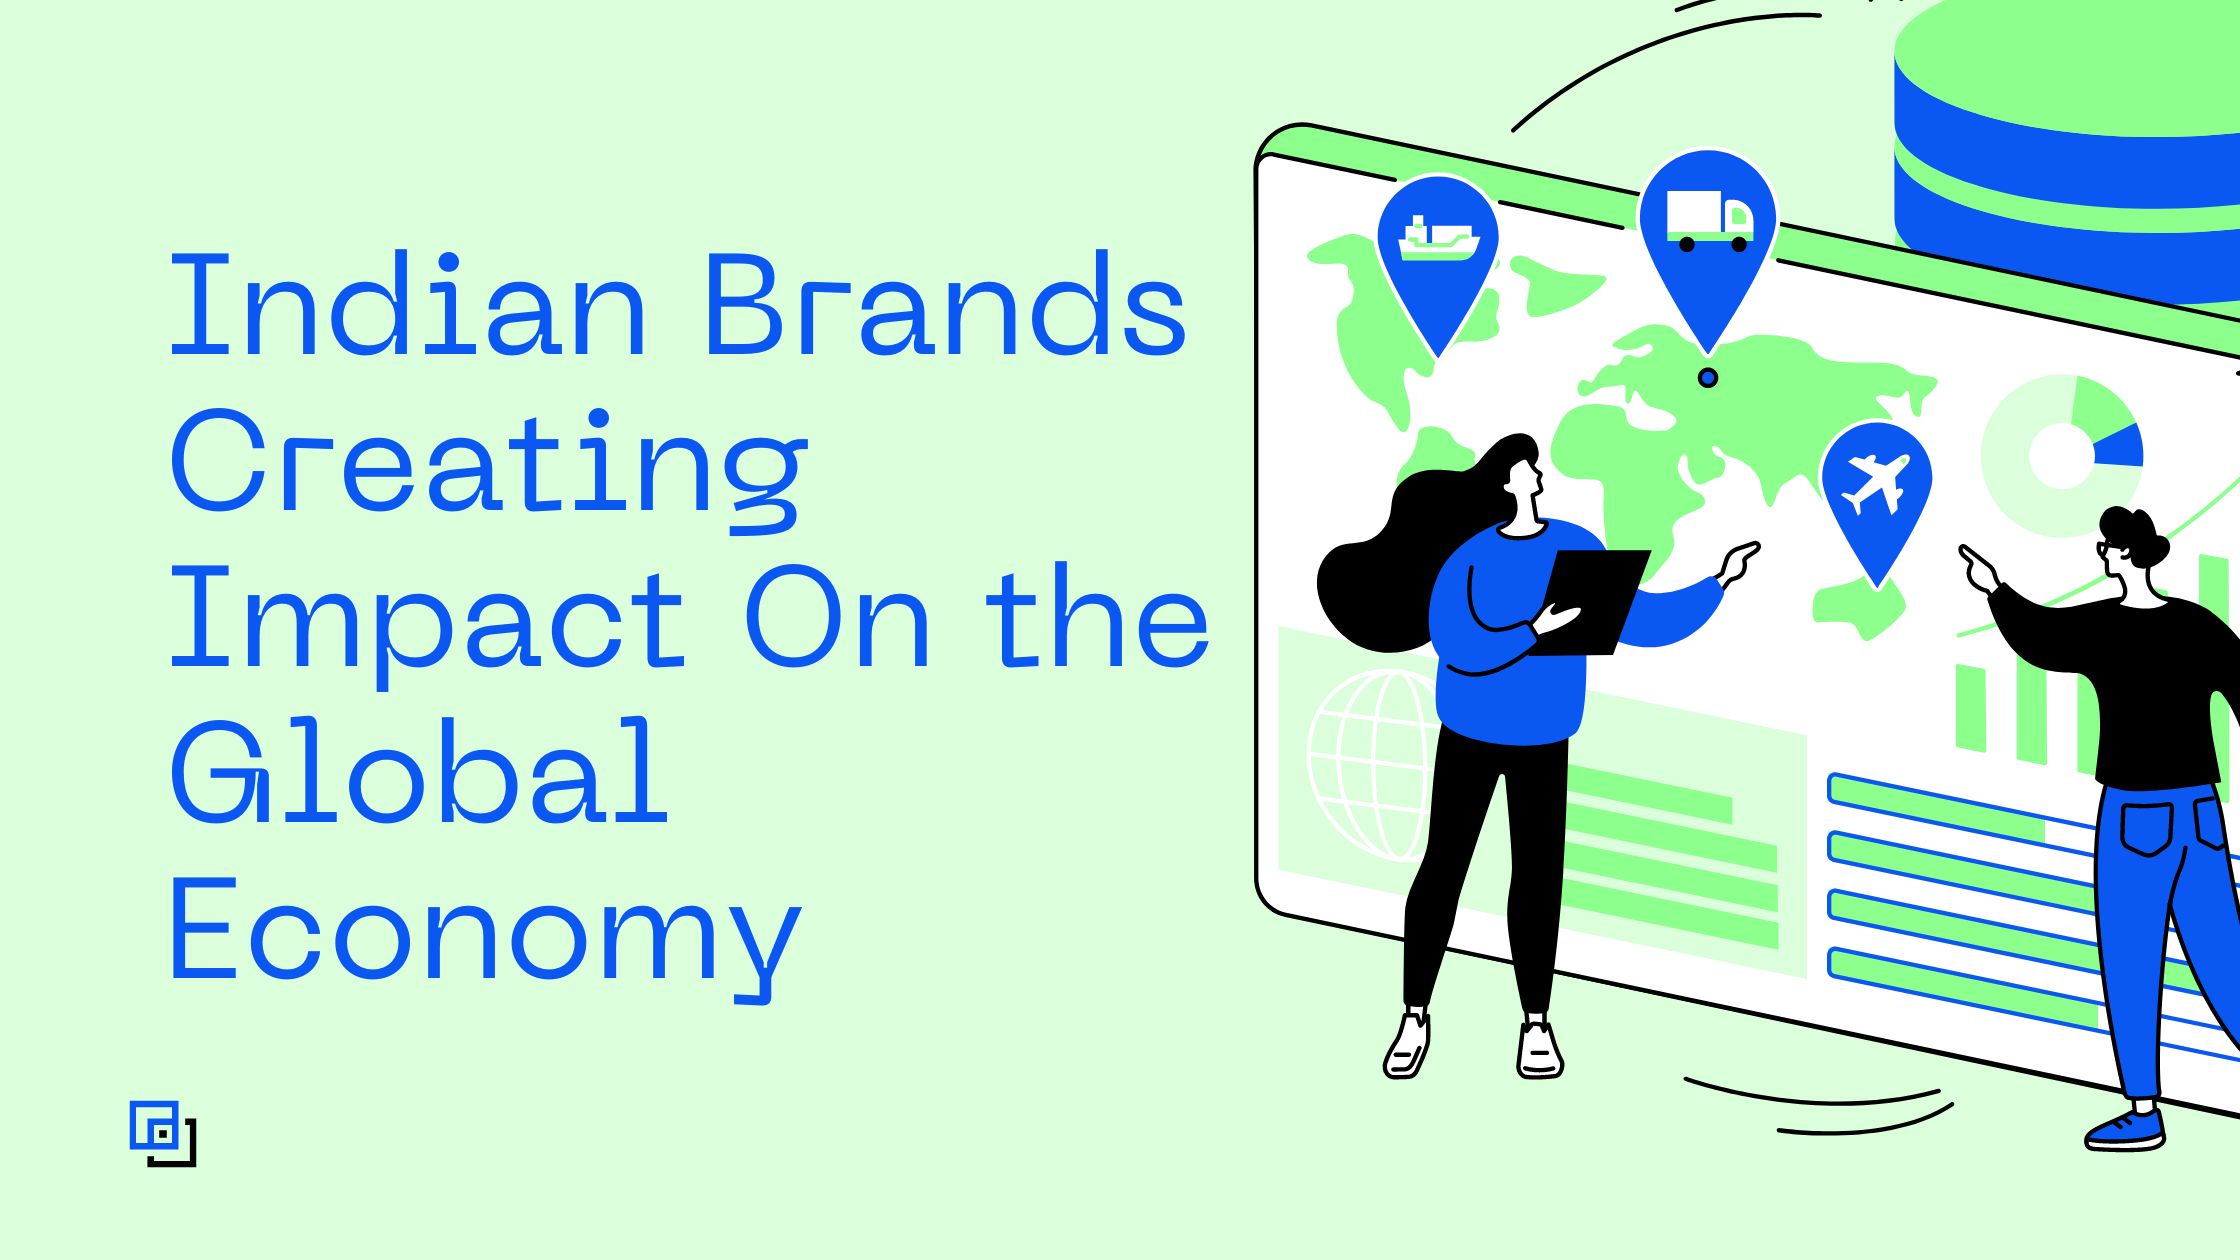 Indian Brands Creating Impact on Global Economy